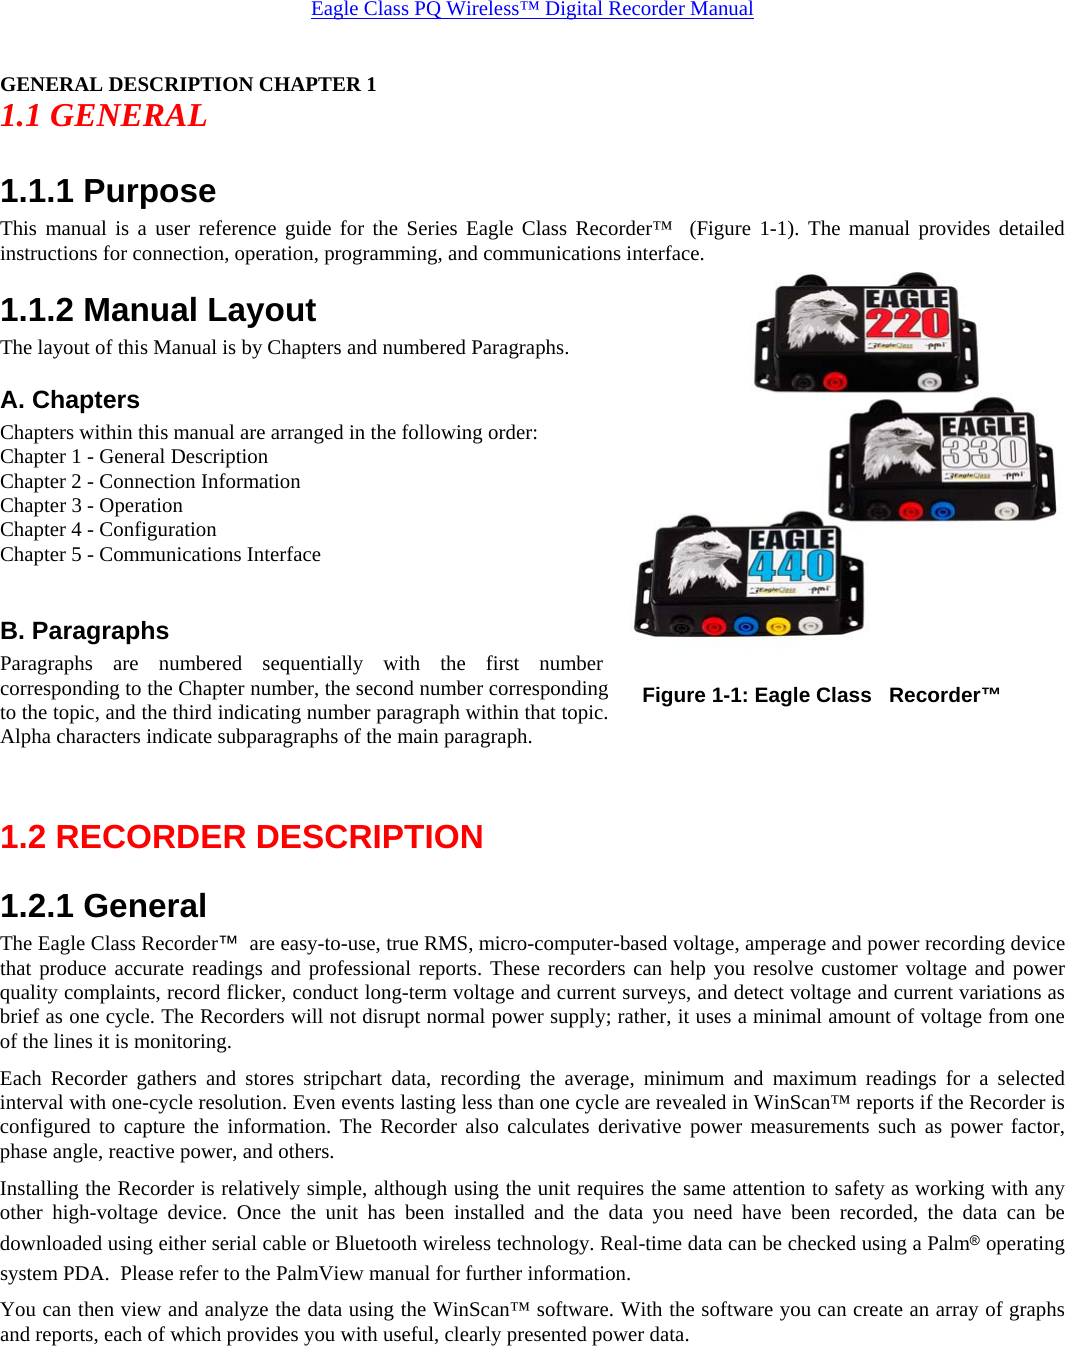 Eagle Class PQ Wireless™ Digital Recorder Manual GENERAL DESCRIPTION CHAPTER 1 1.1 GENERAL 1.1.1 Purpose This manual is a user reference guide for the Series Eagle Class Recorder™  (Figure 1-1). The manual provides detailed instructions for connection, operation, programming, and communications interface.  1.1.2 Manual Layout The layout of this Manual is by Chapters and numbered Paragraphs. A. Chapters  Chapters within this manual are arranged in the following order: Chapter 1 - General Description Chapter 2 - Connection Information Chapter 3 - Operation Chapter 4 - Configuration Chapter 5 - Communications Interface  B. Paragraphs Paragraphs are numbered sequentially with the first number corresponding to the Chapter number, the second number corresponding to the topic, and the third indicating number paragraph within that topic. Alpha characters indicate subparagraphs of the main paragraph.  1.2 RECORDER DESCRIPTION 1.2.1 General The Eagle Class Recorder™  are easy-to-use, true RMS, micro-computer-based voltage, amperage and power recording device that produce accurate readings and professional reports. These recorders can help you resolve customer voltage and power quality complaints, record flicker, conduct long-term voltage and current surveys, and detect voltage and current variations as brief as one cycle. The Recorders will not disrupt normal power supply; rather, it uses a minimal amount of voltage from one of the lines it is monitoring. Each Recorder gathers and stores stripchart data, recording the average, minimum and maximum readings for a selected interval with one-cycle resolution. Even events lasting less than one cycle are revealed in WinScan™ reports if the Recorder is configured to capture the information. The Recorder also calculates derivative power measurements such as power factor, phase angle, reactive power, and others. Installing the Recorder is relatively simple, although using the unit requires the same attention to safety as working with any other high-voltage device. Once the unit has been installed and the data you need have been recorded, the data can be downloaded using either serial cable or Bluetooth wireless technology. Real-time data can be checked using a Palm® operating system PDA.  Please refer to the PalmView manual for further information. You can then view and analyze the data using the WinScan™ software. With the software you can create an array of graphs and reports, each of which provides you with useful, clearly presented power data. Figure 1-1: Eagle Class   Recorder™ 